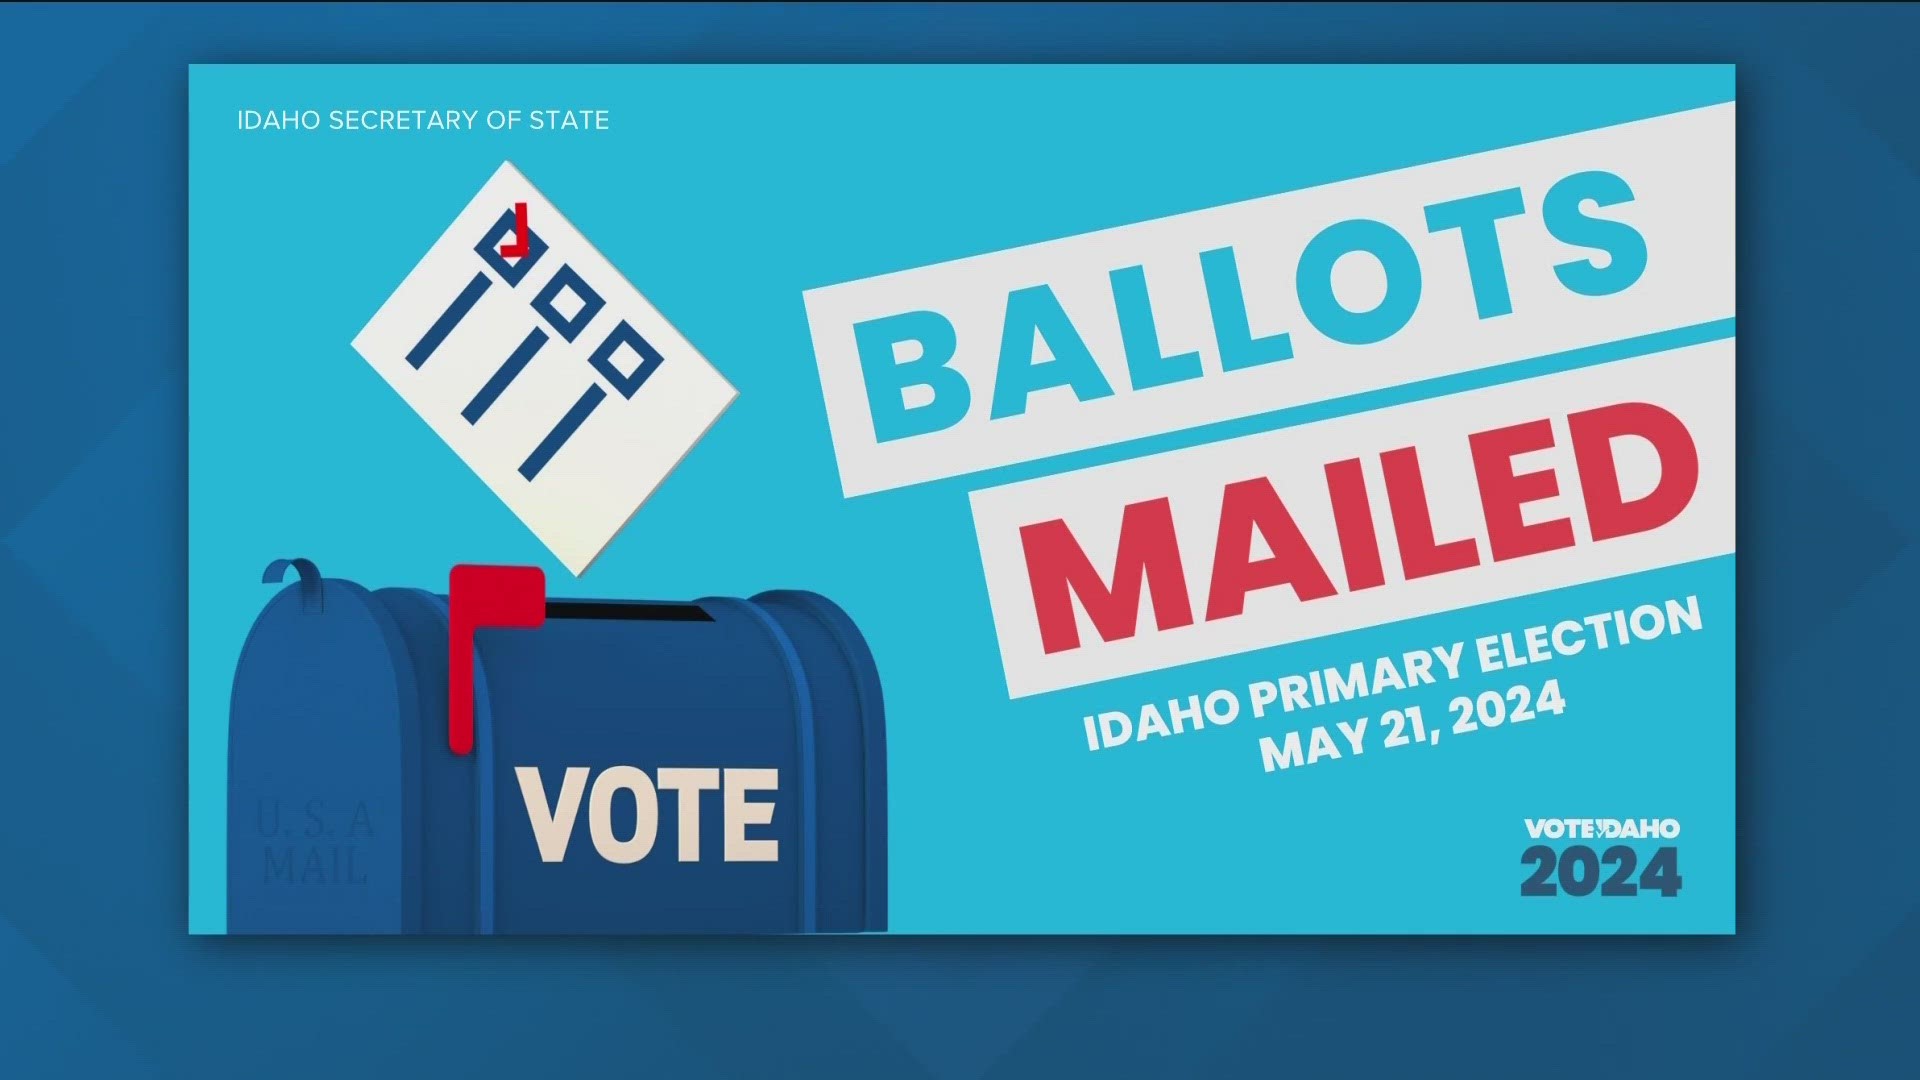 County elections offices started mailing absentee ballots for the primary election in May.